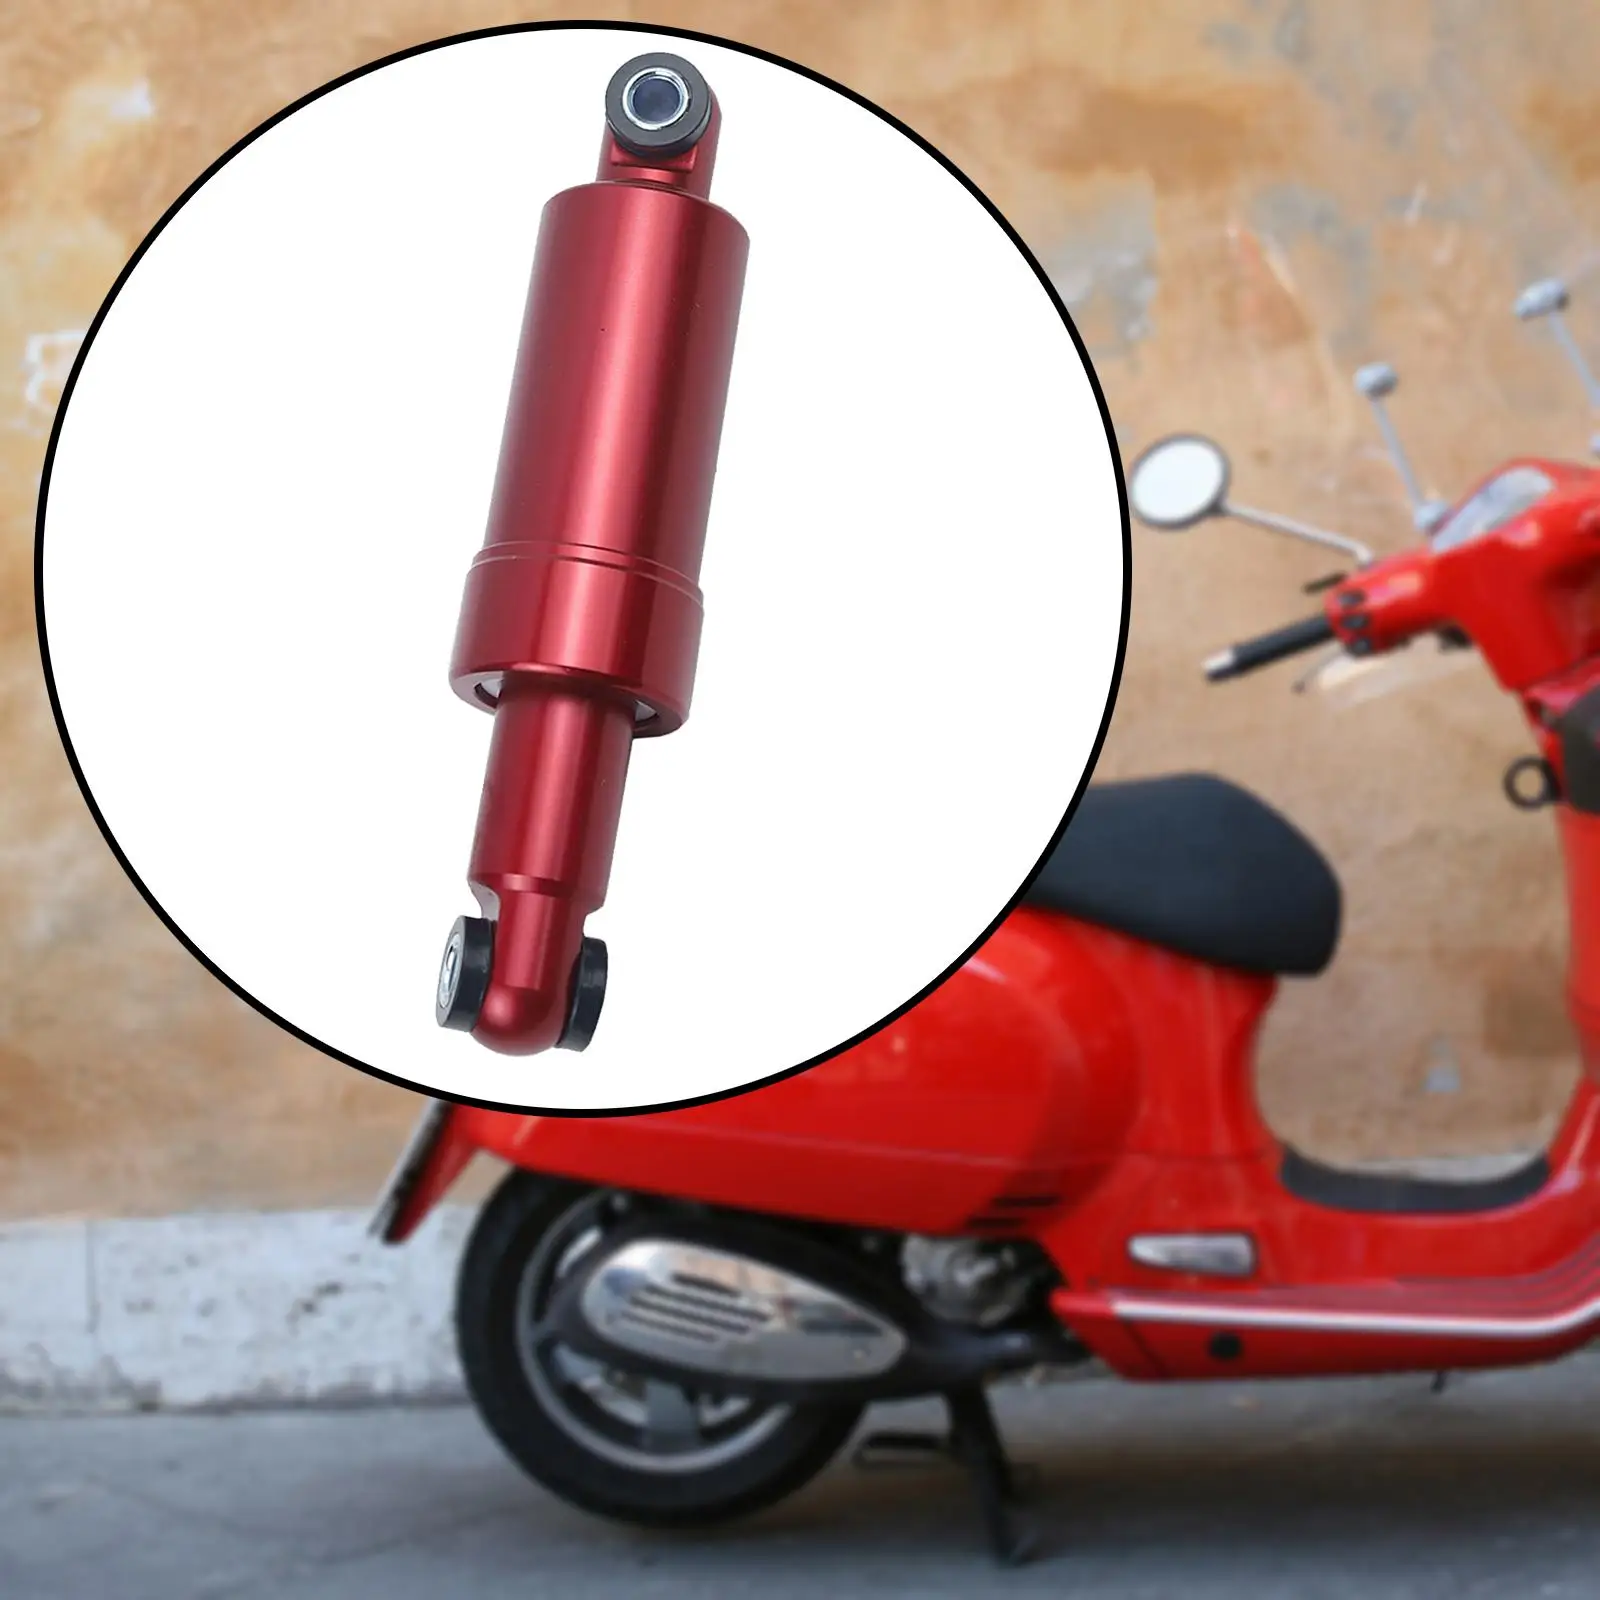 150mm Rear Suspension Shock Absorber Replace Parts for Electric Scooter Mini